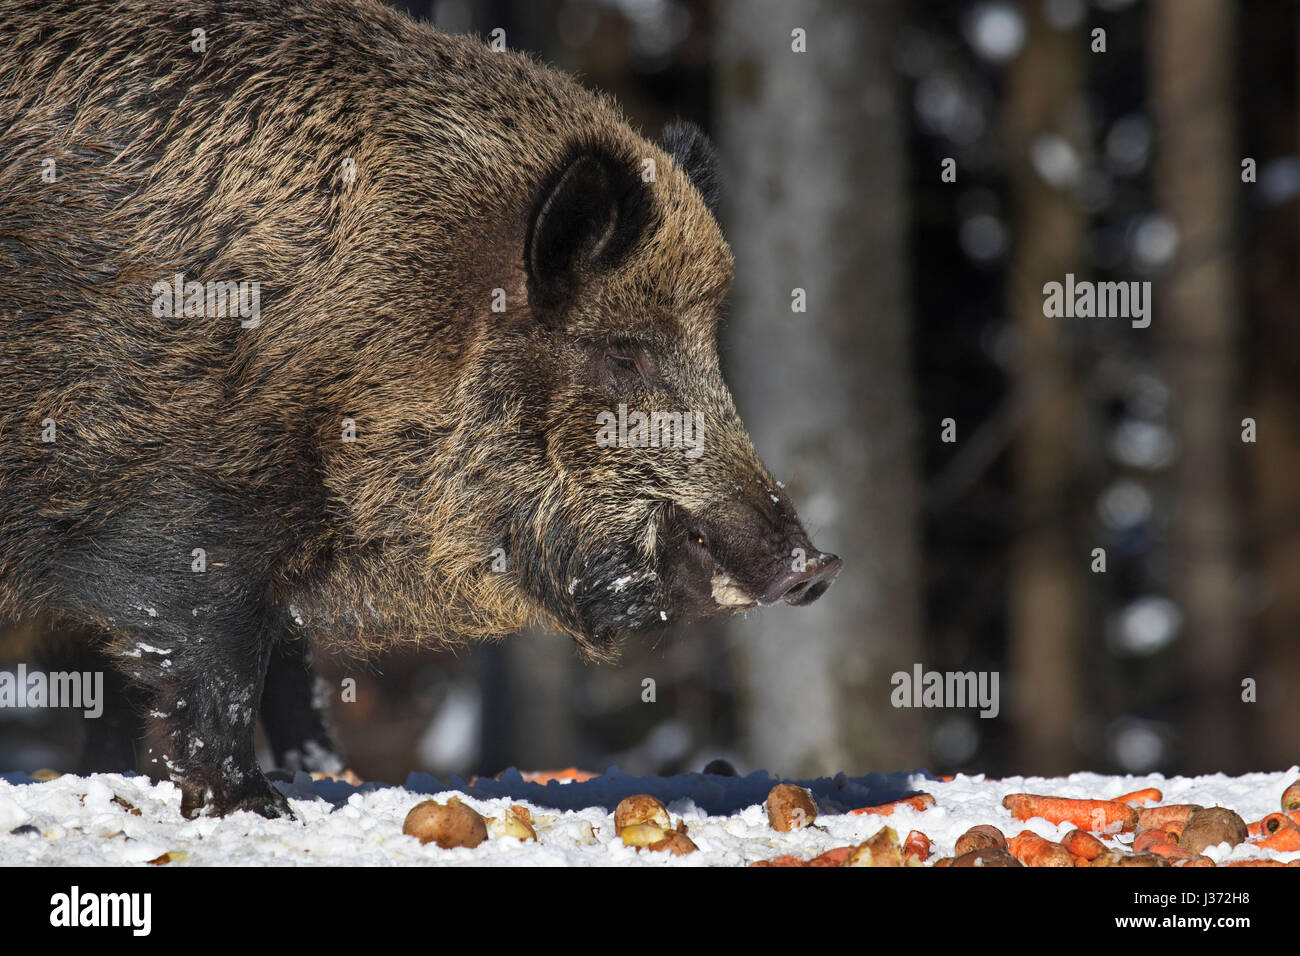 Wild boar (Sus scrofa) eating potatoes and carrots at feeding station in forest in the snow in winter Stock Photo